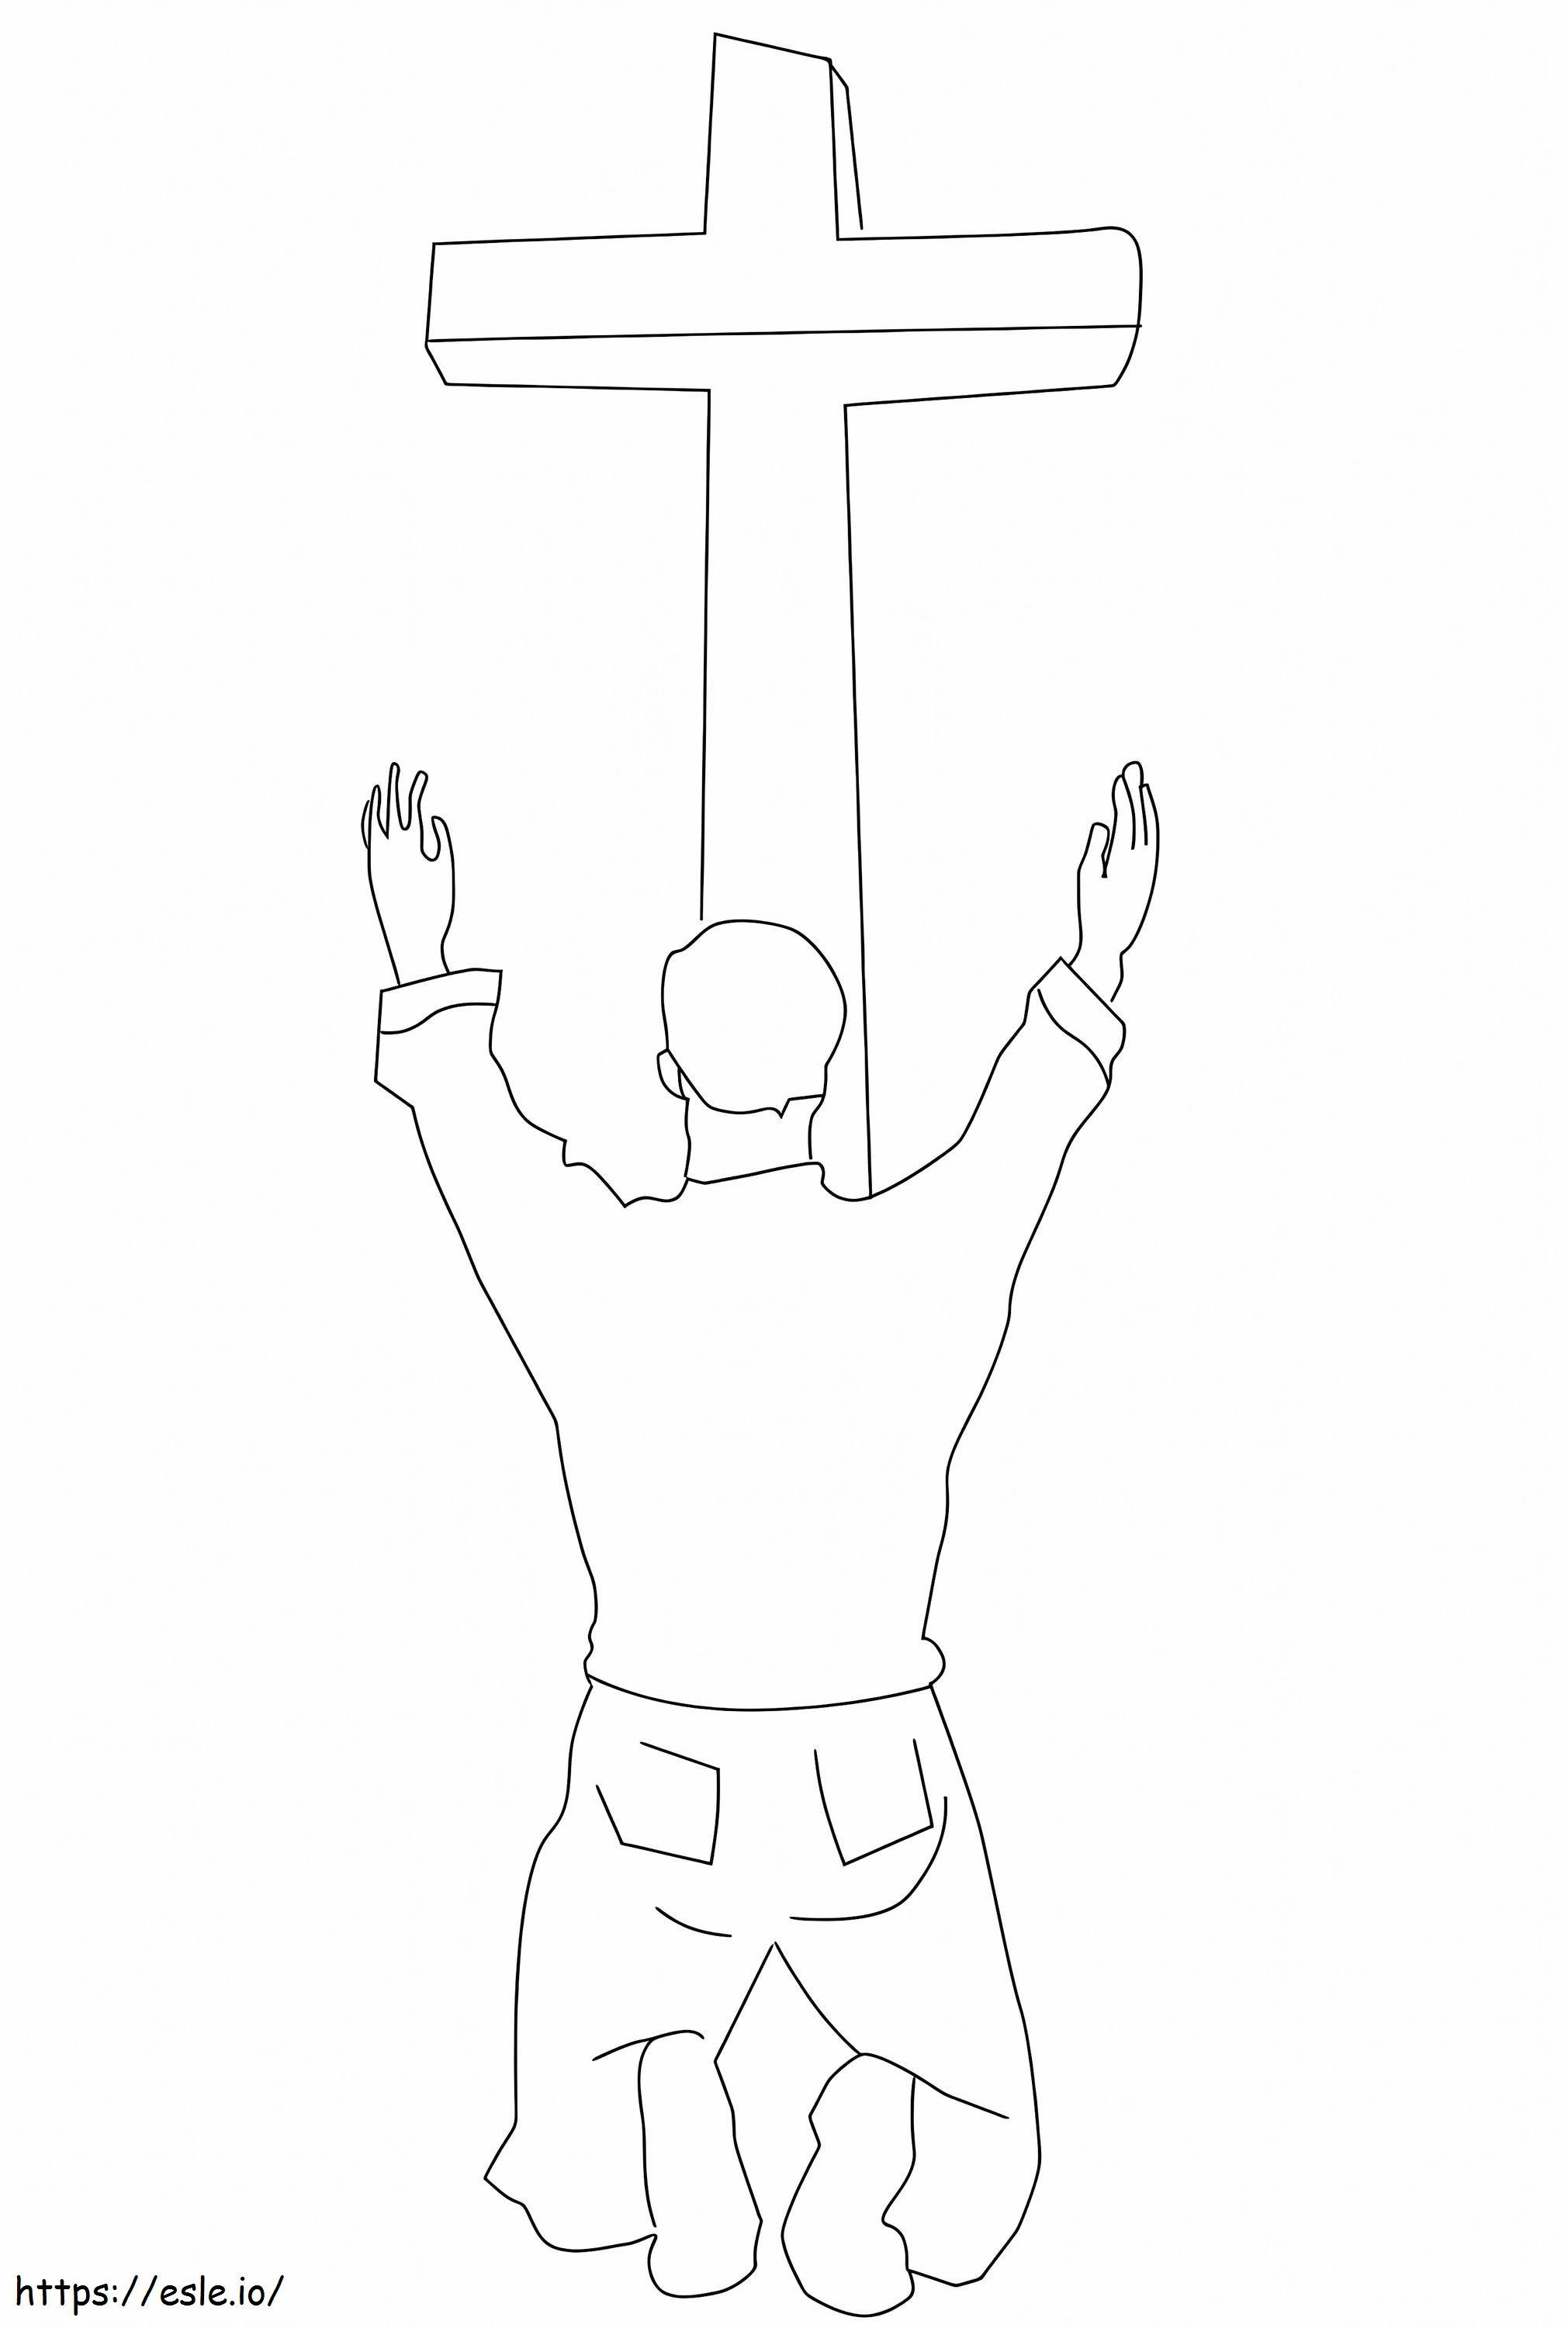 Praying For Forgiveness coloring page